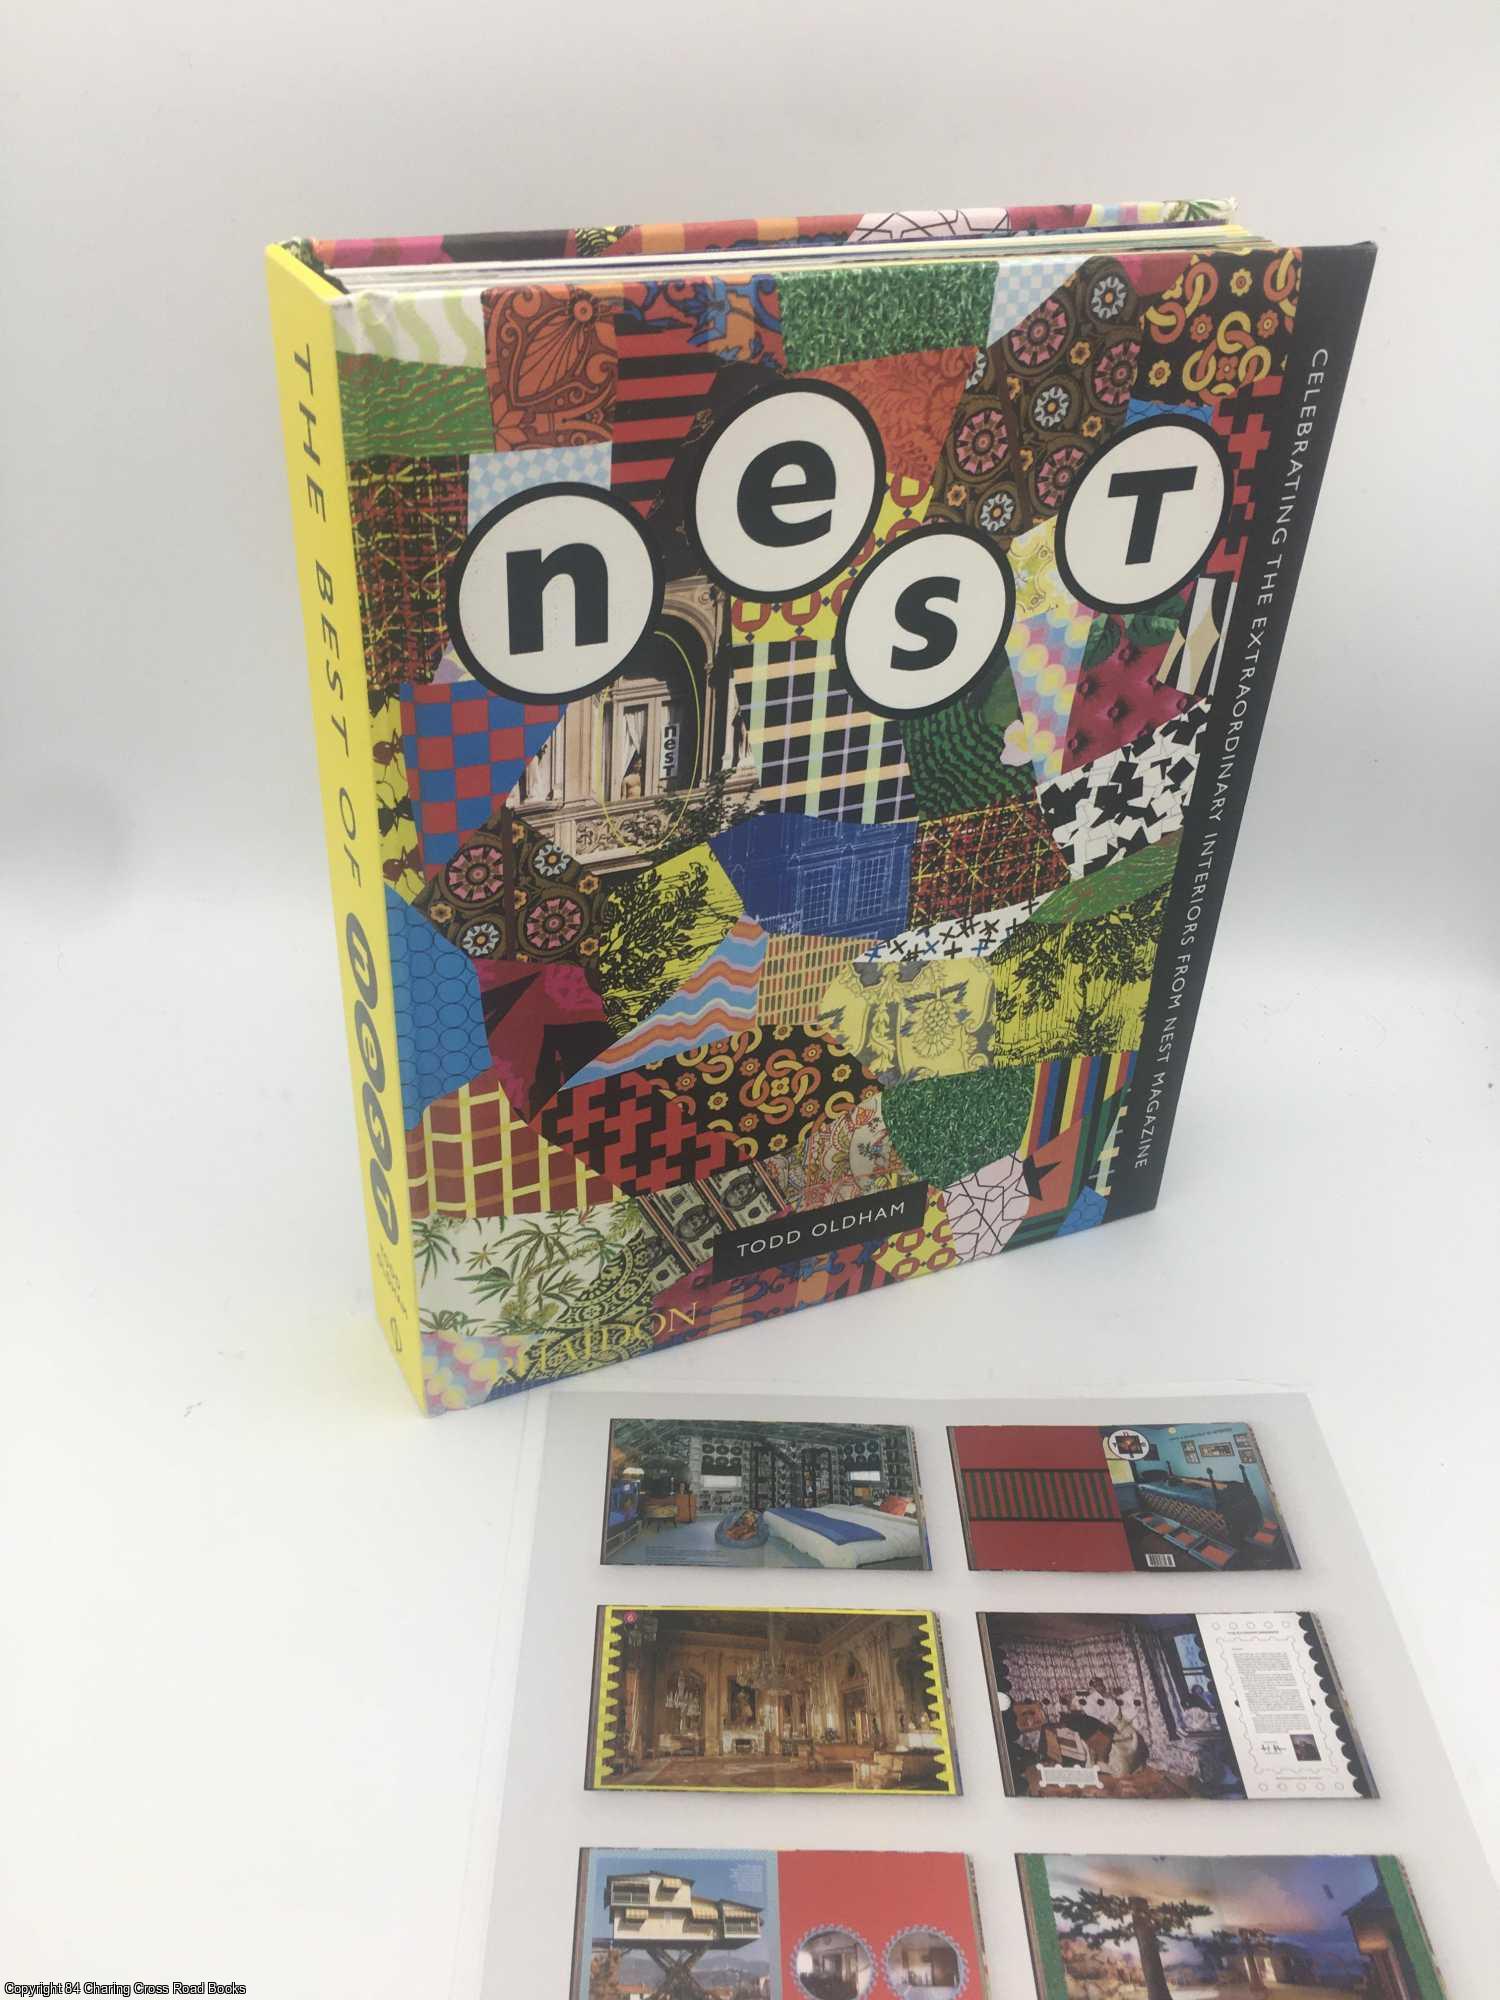 Oldham, Todd - The Best of Nest: Celebrating the Extraordinary Interiors from Nest Magazine